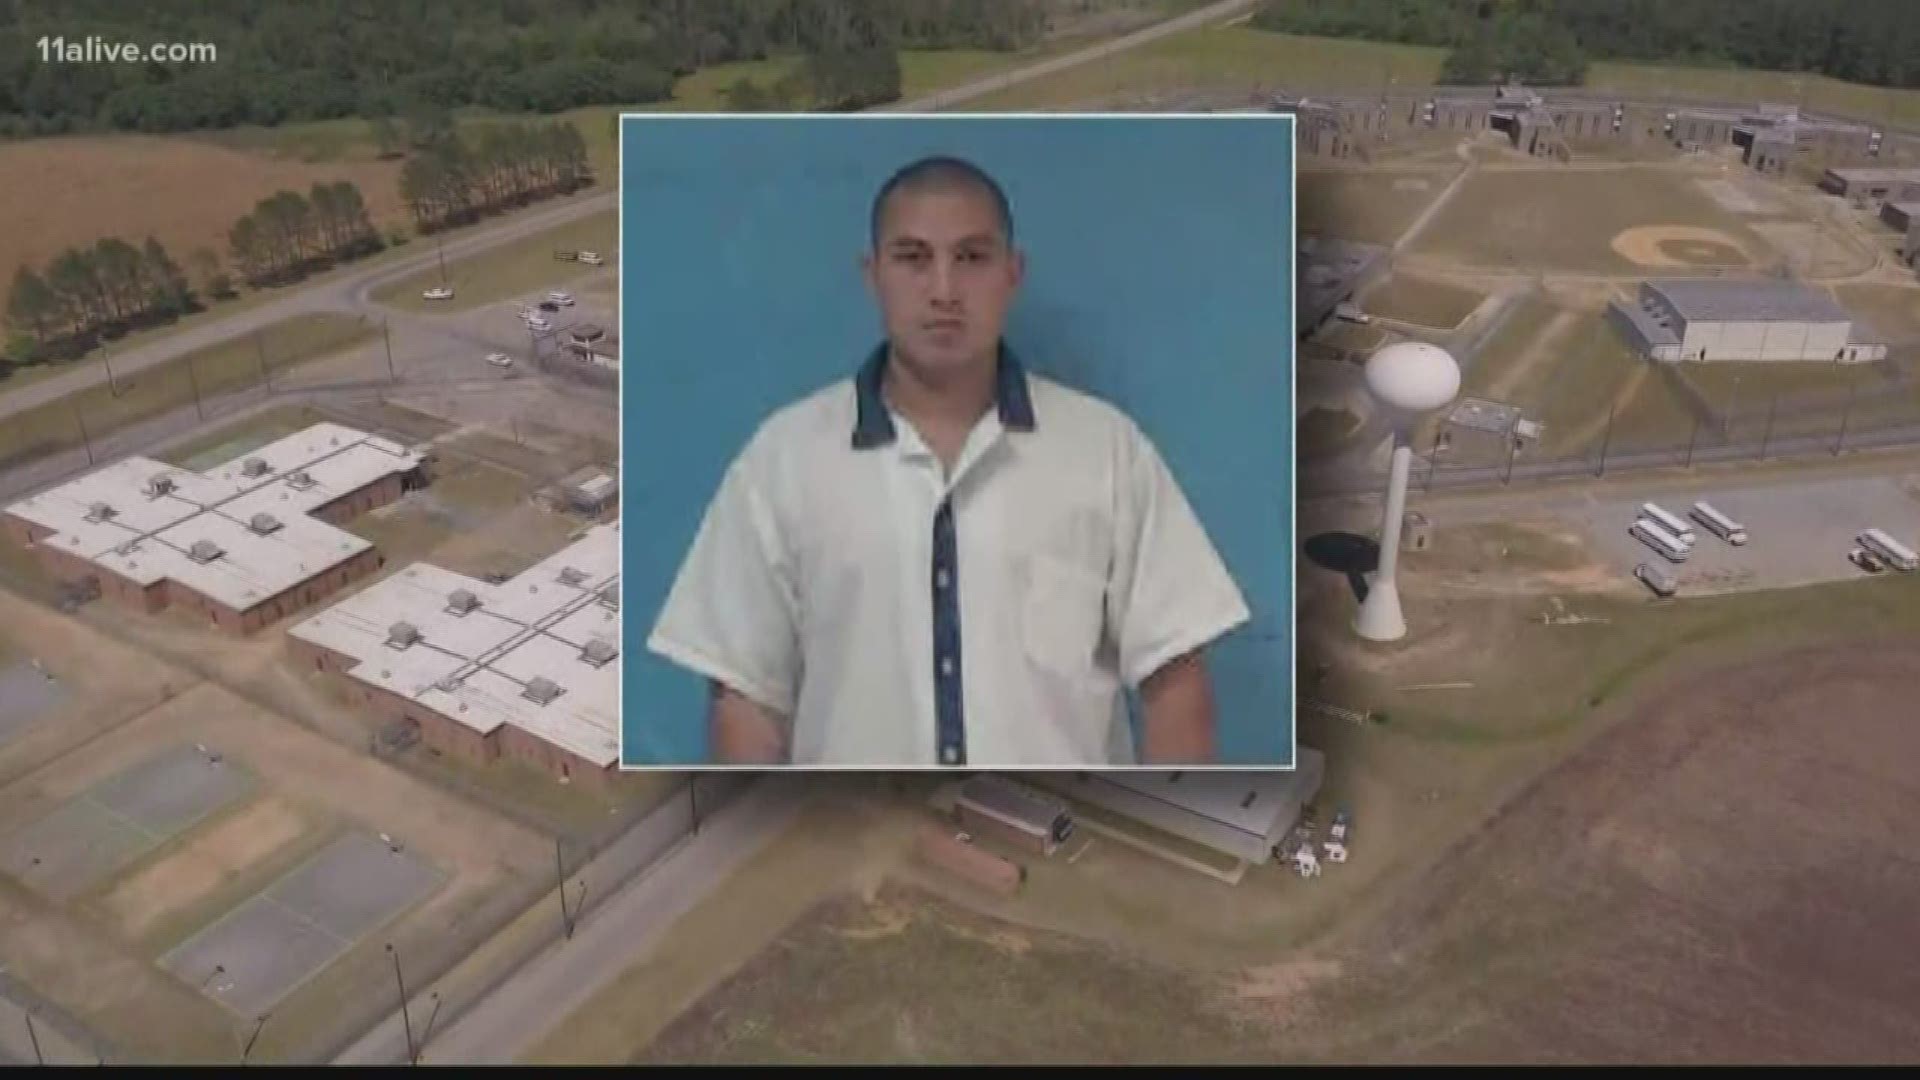 According to the Georgia Department of Corrections, Tony Maycon Munoz-Mendez was set free around 11:30 a.m. on Oct. 25. News of the release was made public Monday.